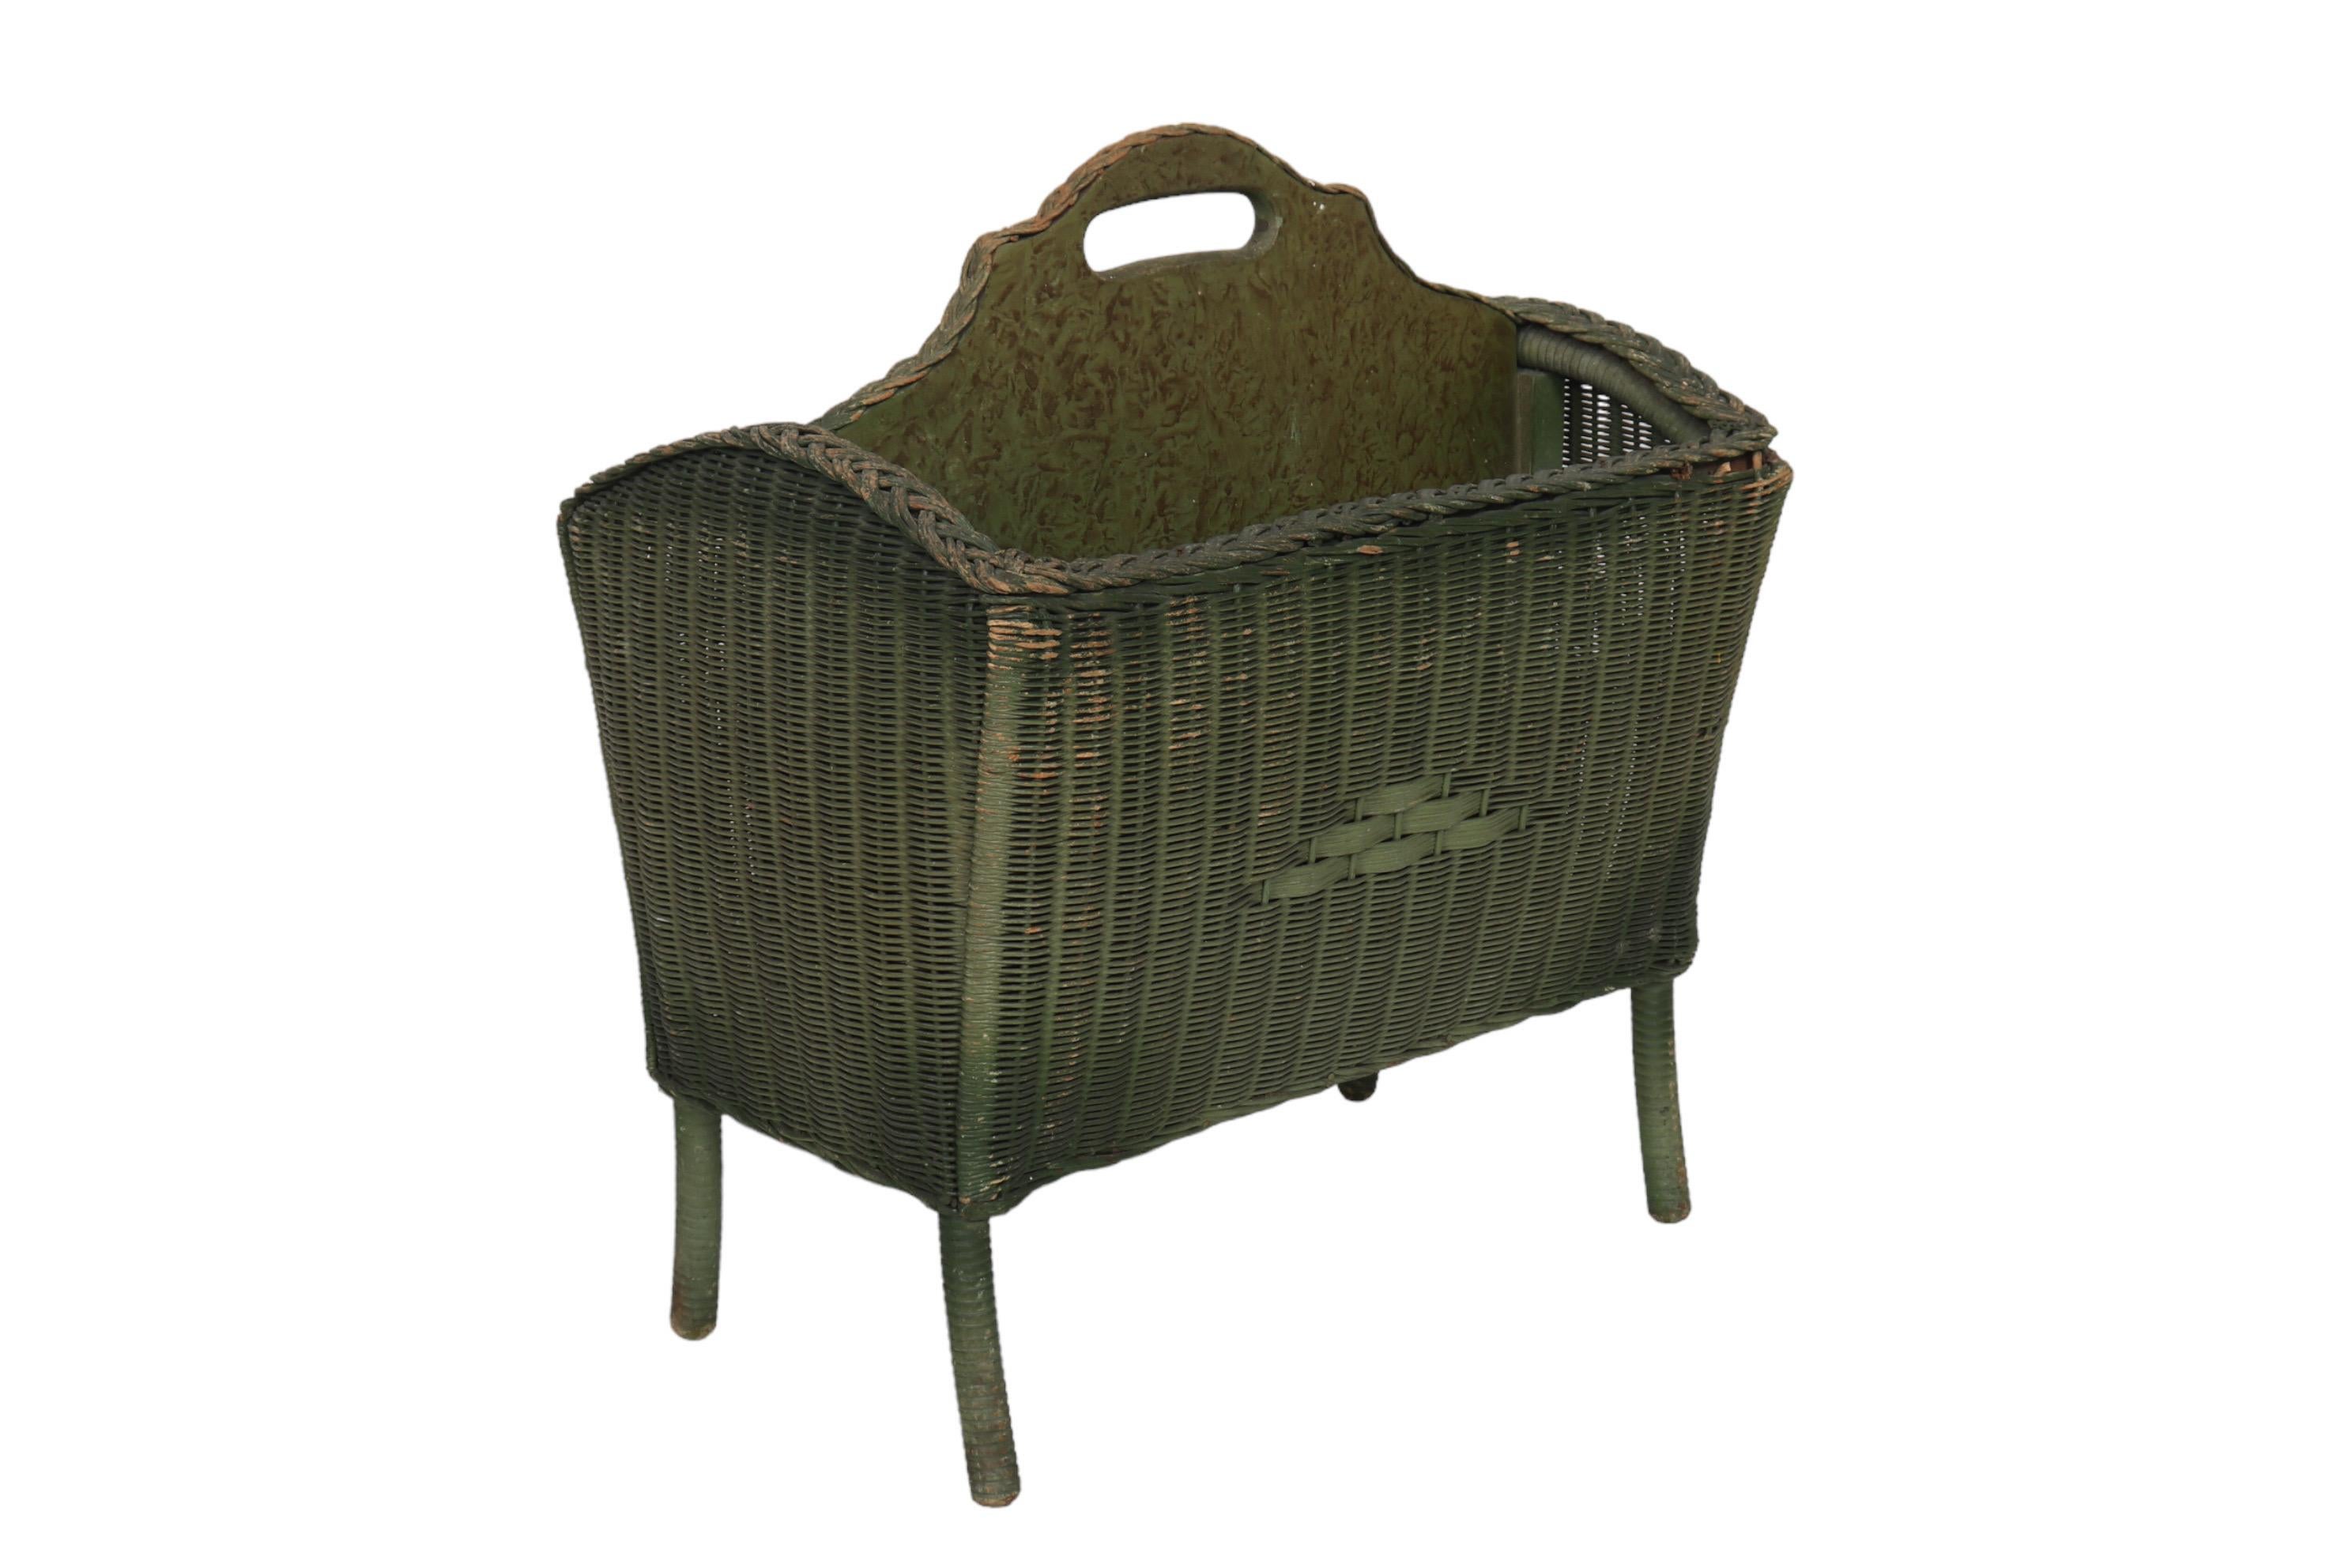 A 1920’s wicker newspaper and magazine rack made by Lloyd Loom of Menominee, Michigan. Decorated with an open wicker braid around the top edge and over a central wooden divider with a central handle. The divider is painted with a burl-like effect.